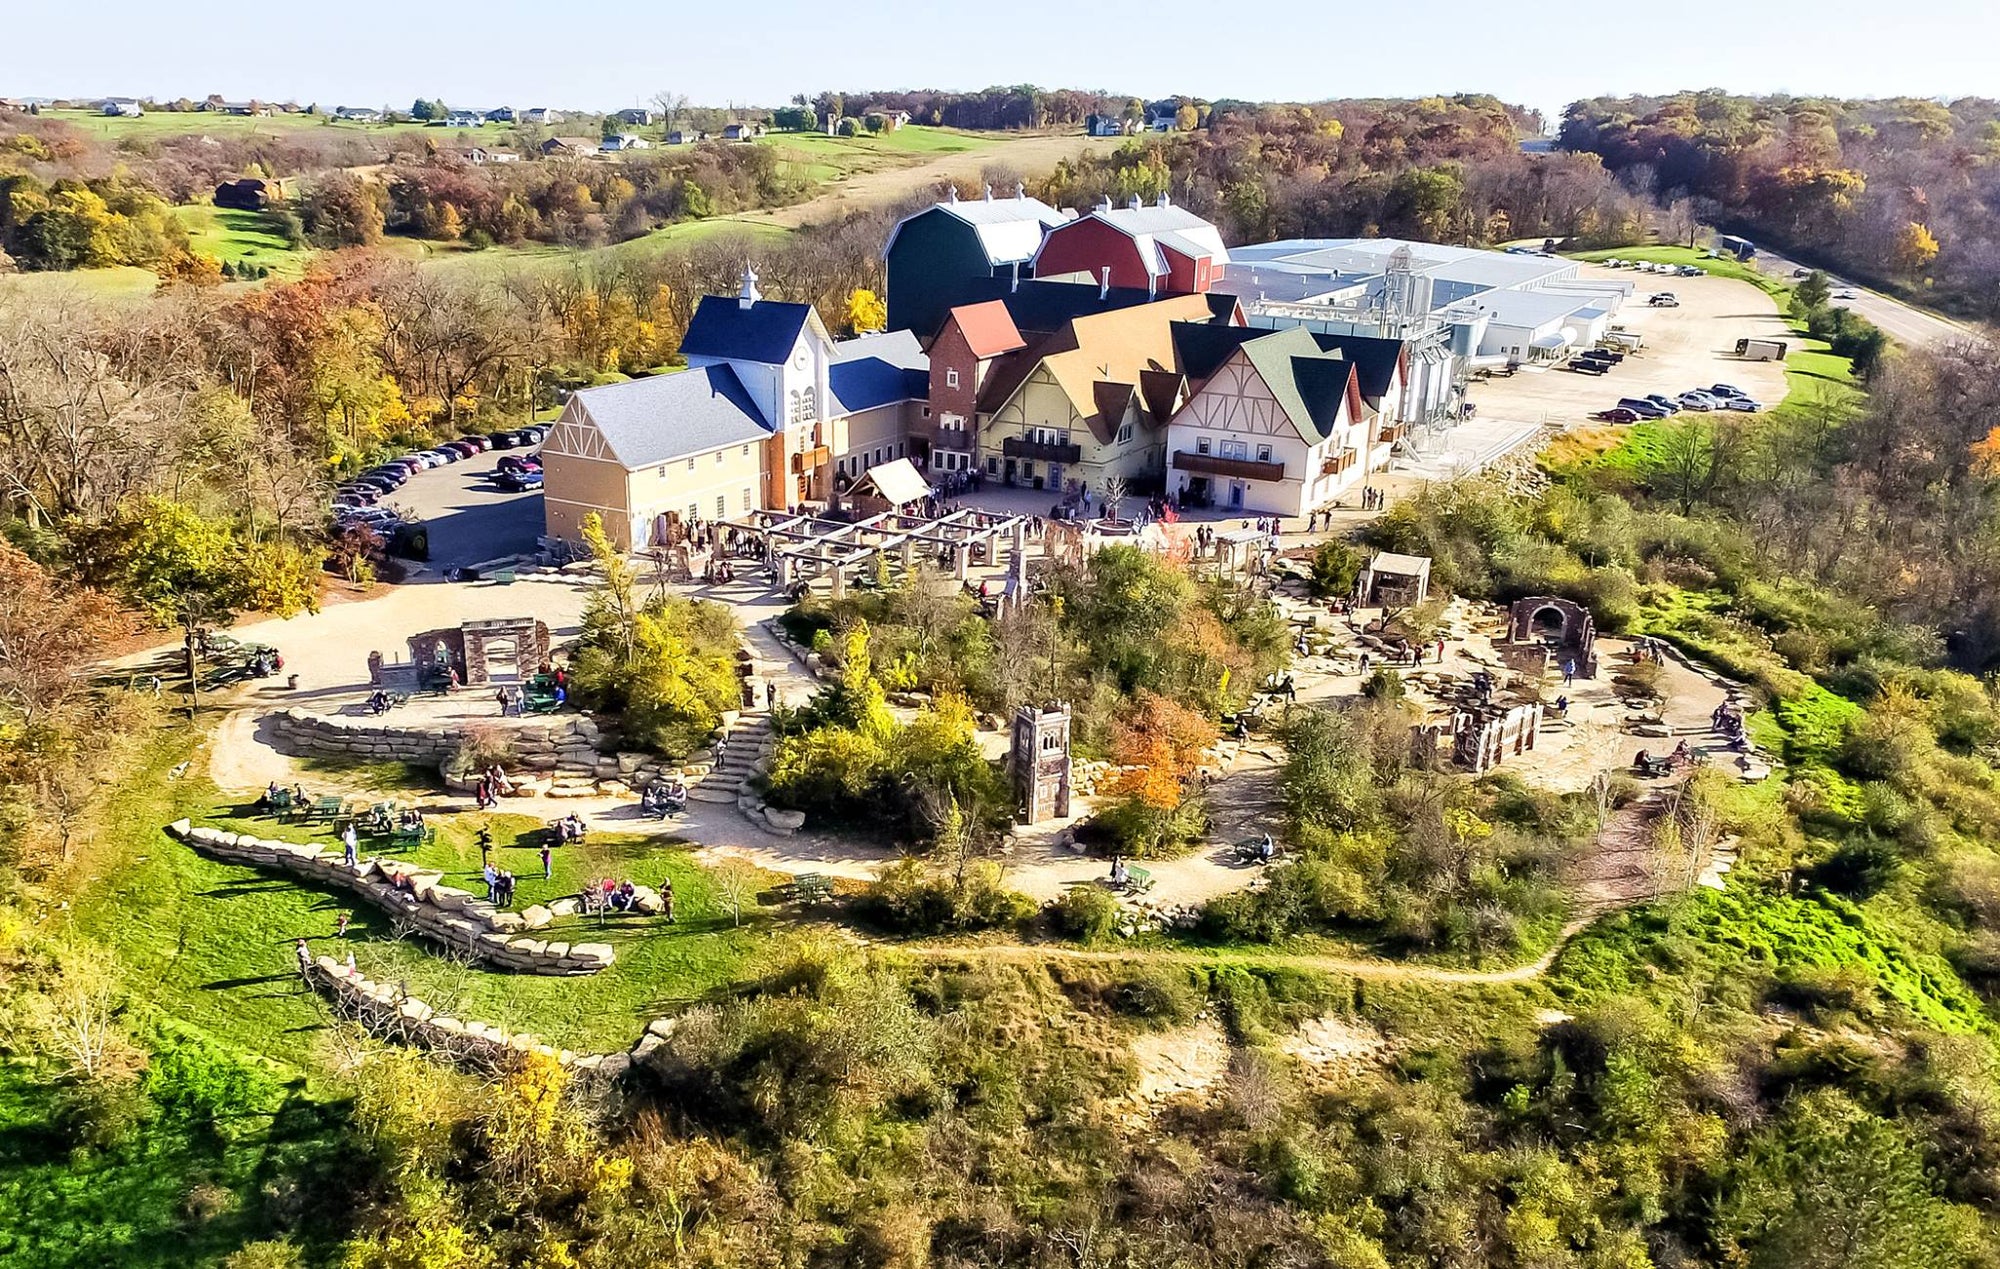 Overhead View of Hilltop Brewery